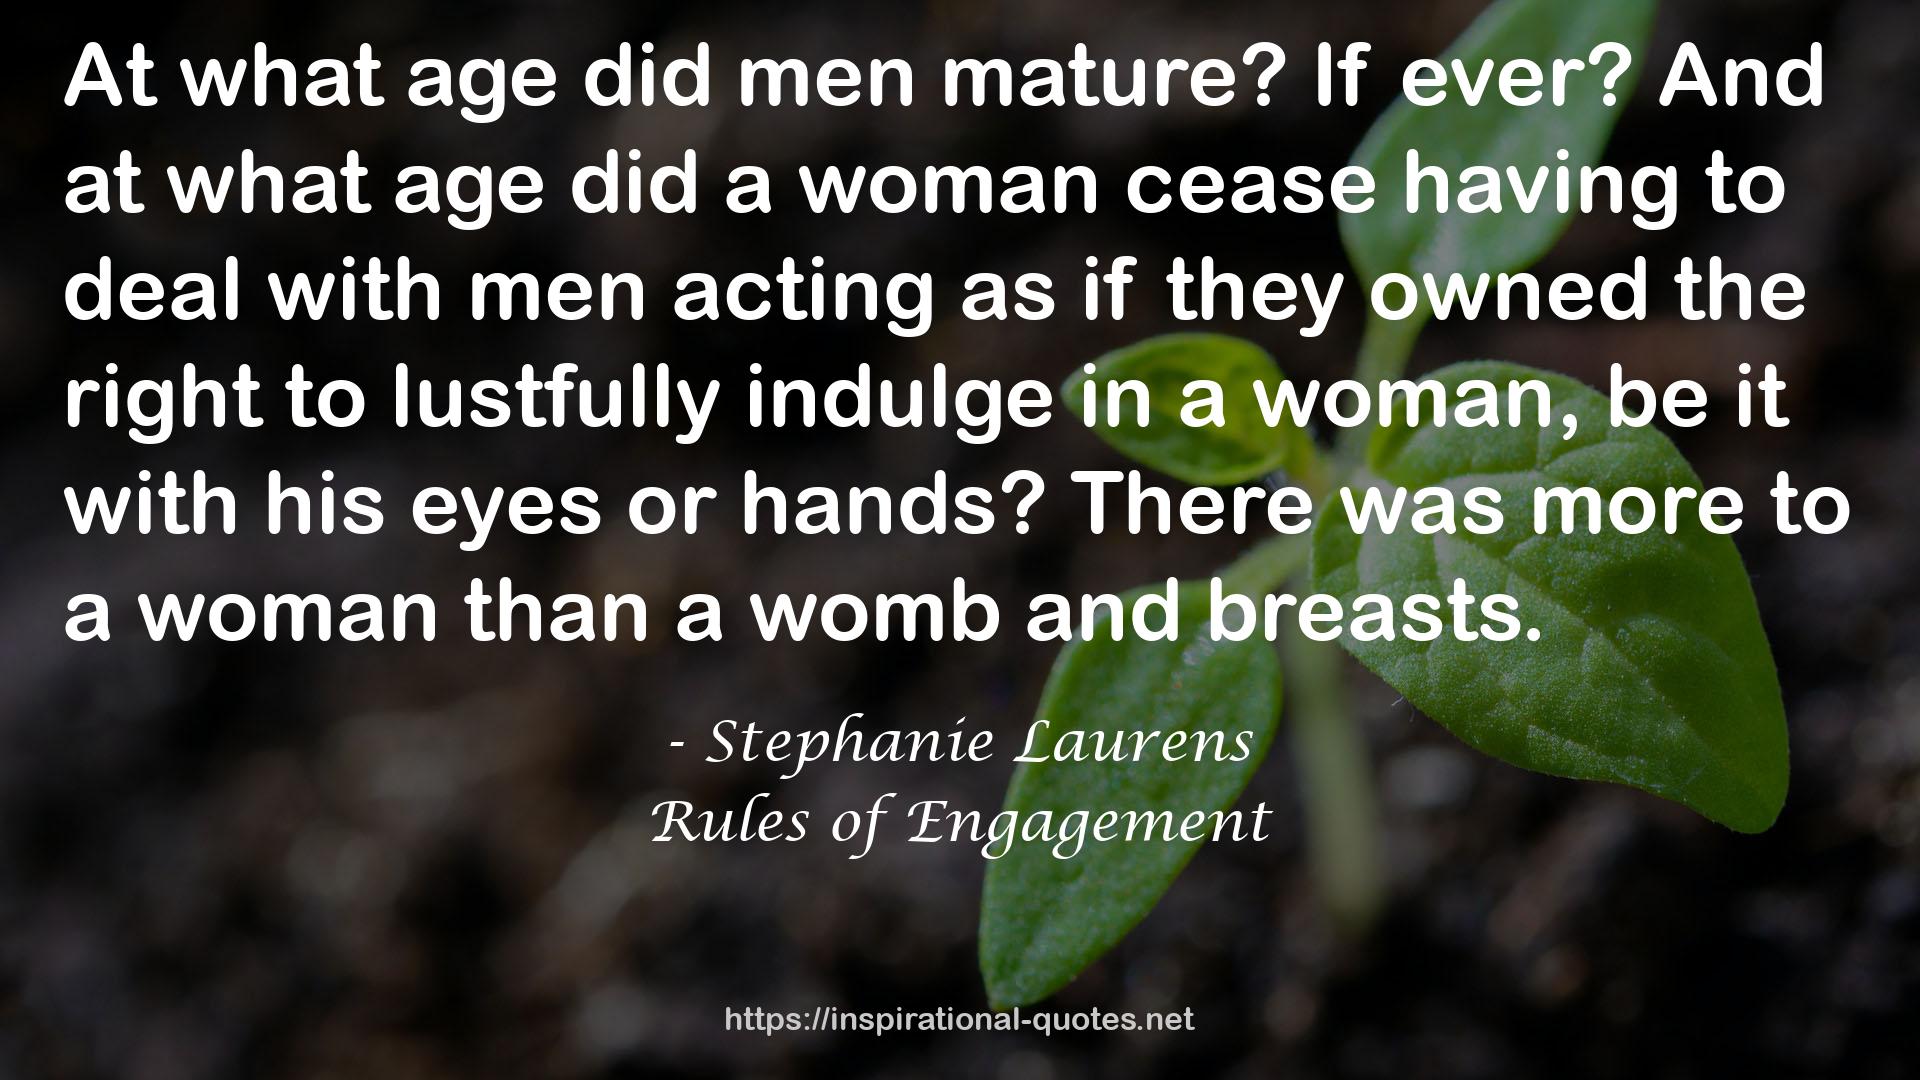 Rules of Engagement QUOTES